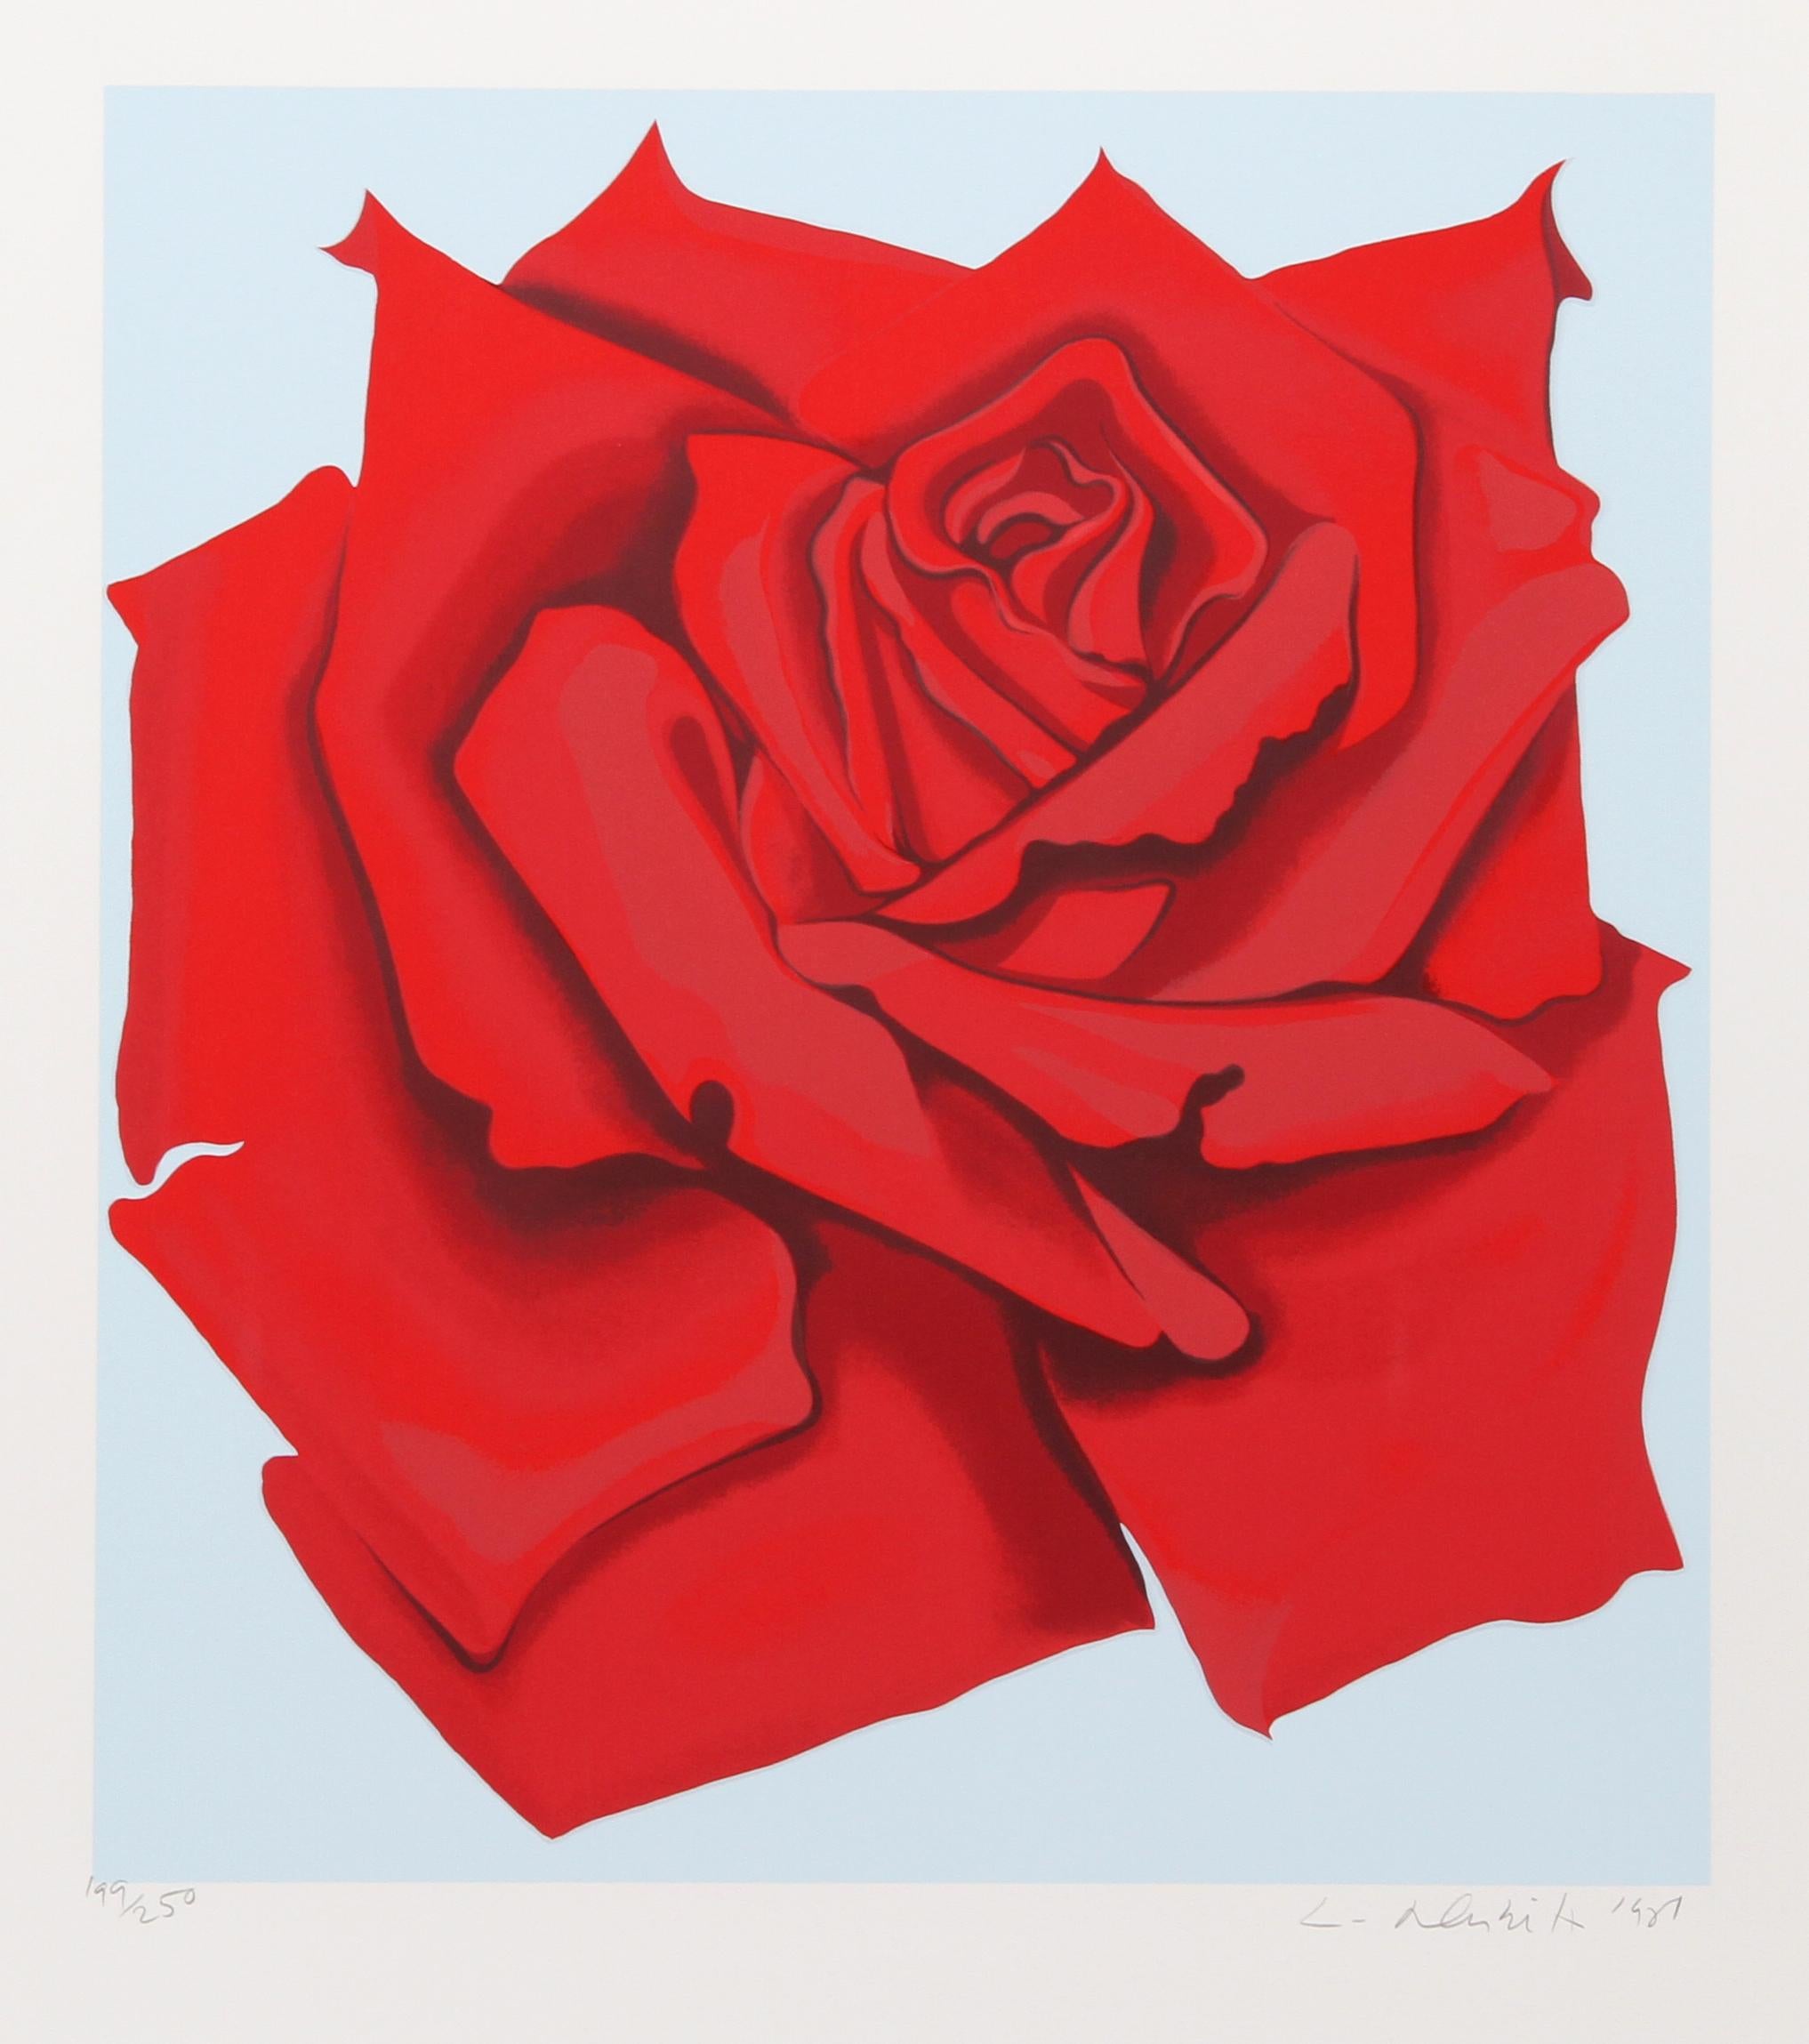 Red Rose from the Stamps series, Screenprint by Lowell Nesbitt